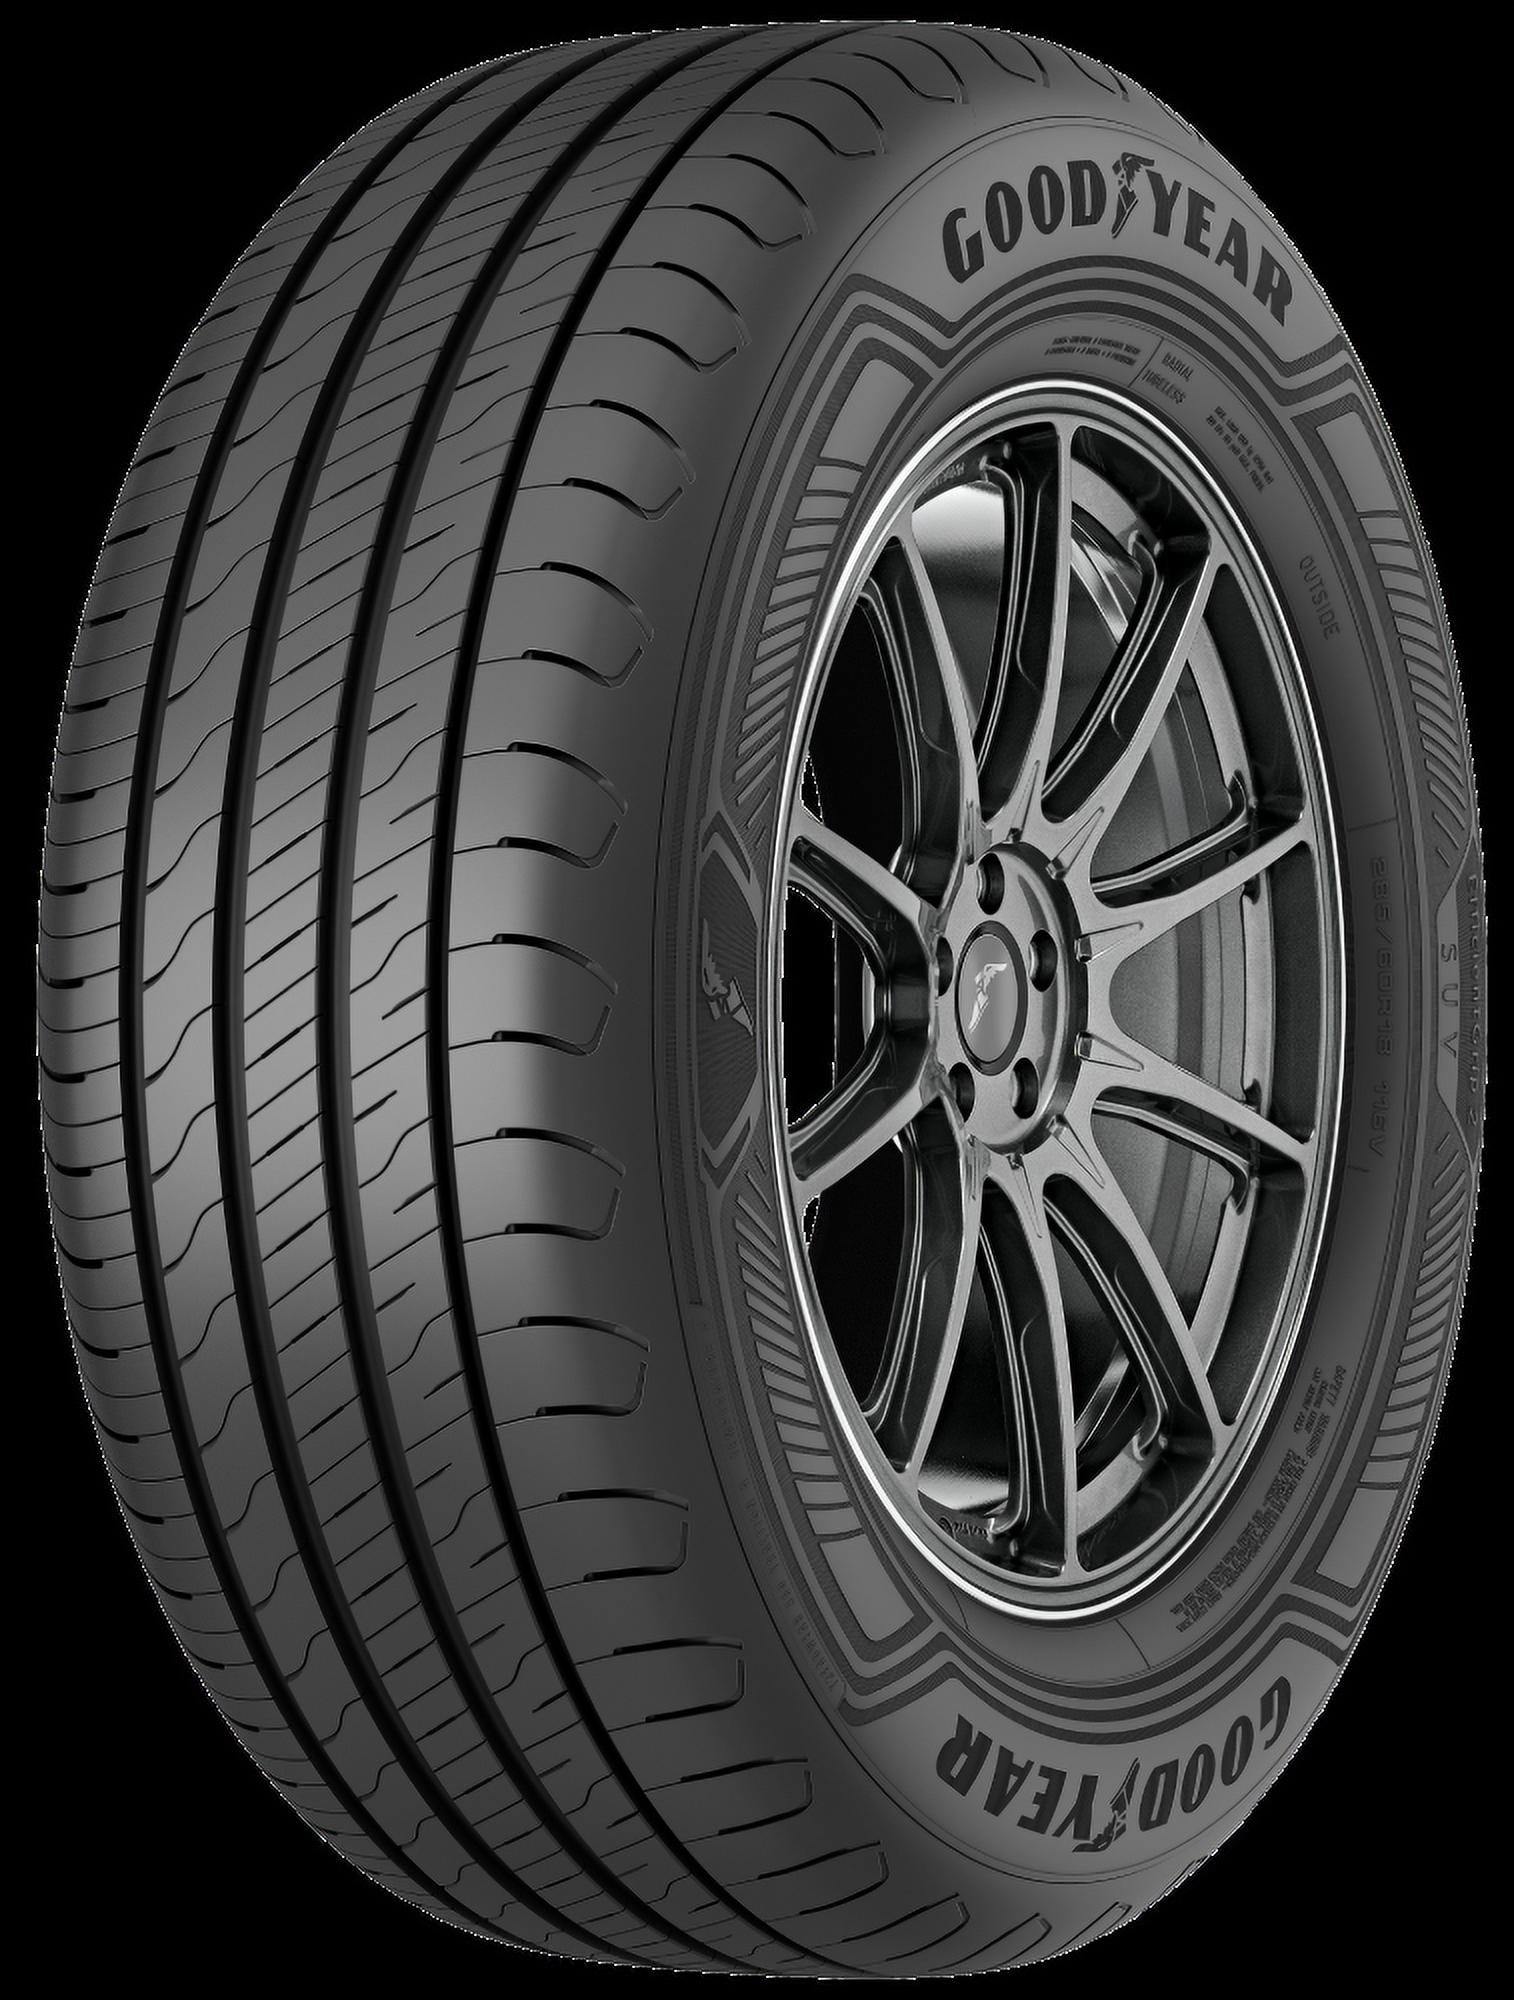 GRIP 225/50R17 Electric Cruze GOODYEAR LT, Chevrolet EFFICIENT PERFORMANCE 2 94W 2012-15 Ford Fits: 2012-18 Focus